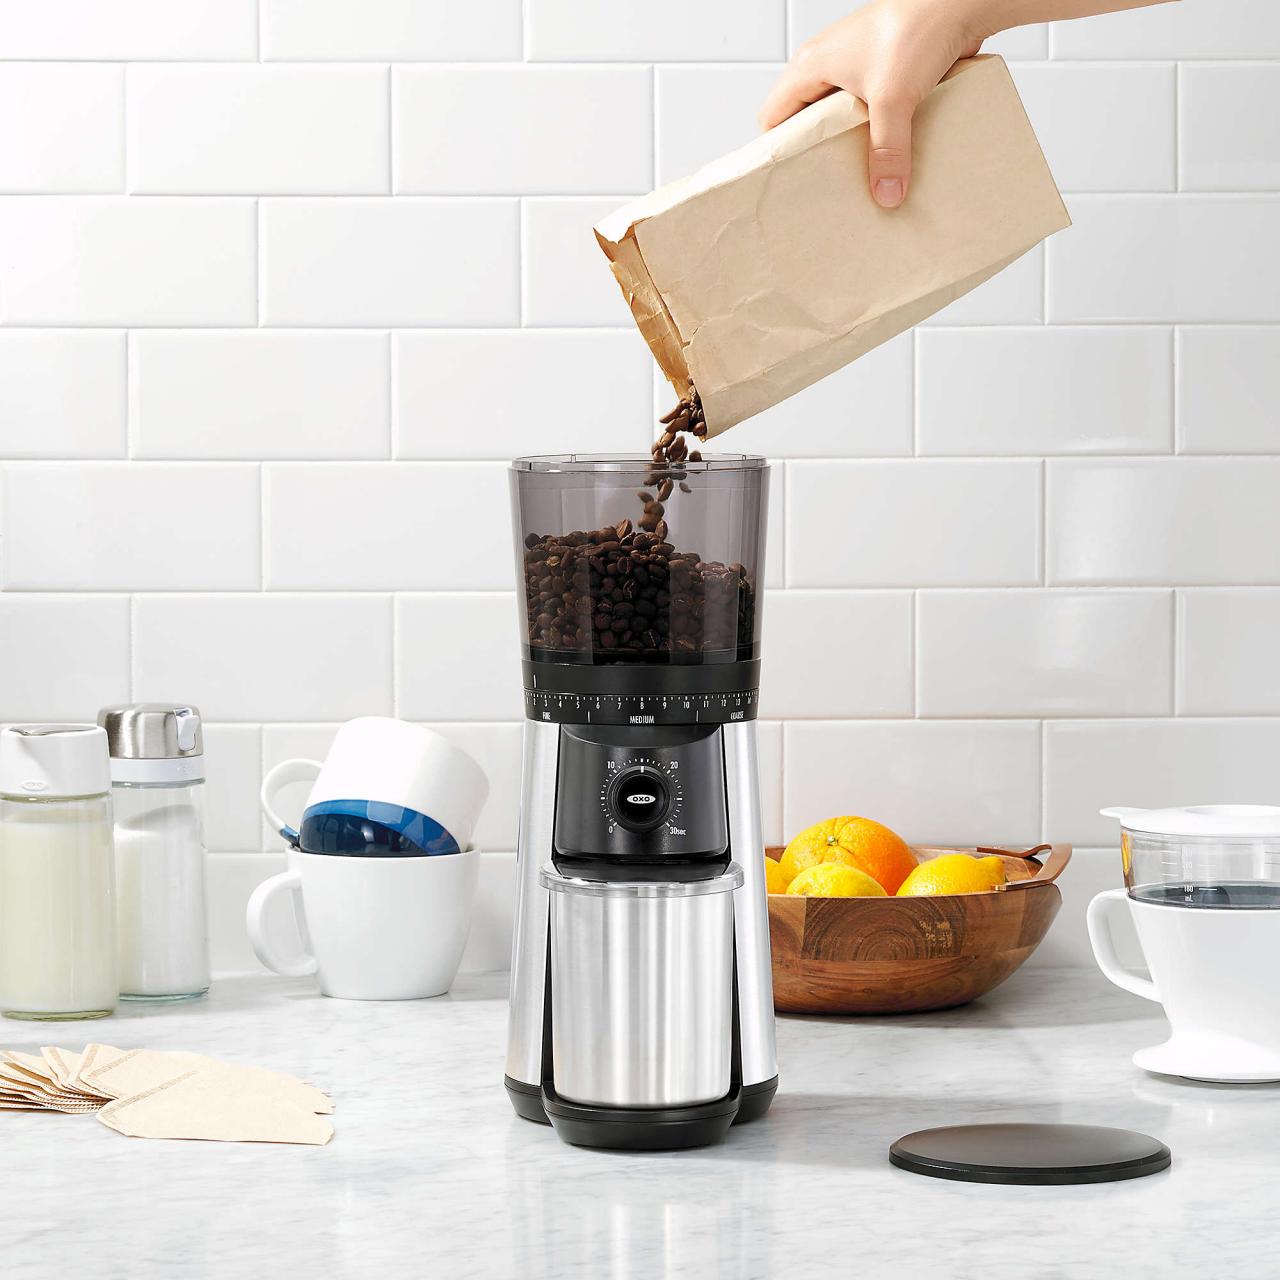 https://food.fnr.sndimg.com/content/dam/images/food/products/2020/11/19/rx_oxo-conical-burr-coffee-grinder-in-stainless-steel.jpeg.rend.hgtvcom.1280.1280.suffix/1605797314784.jpeg